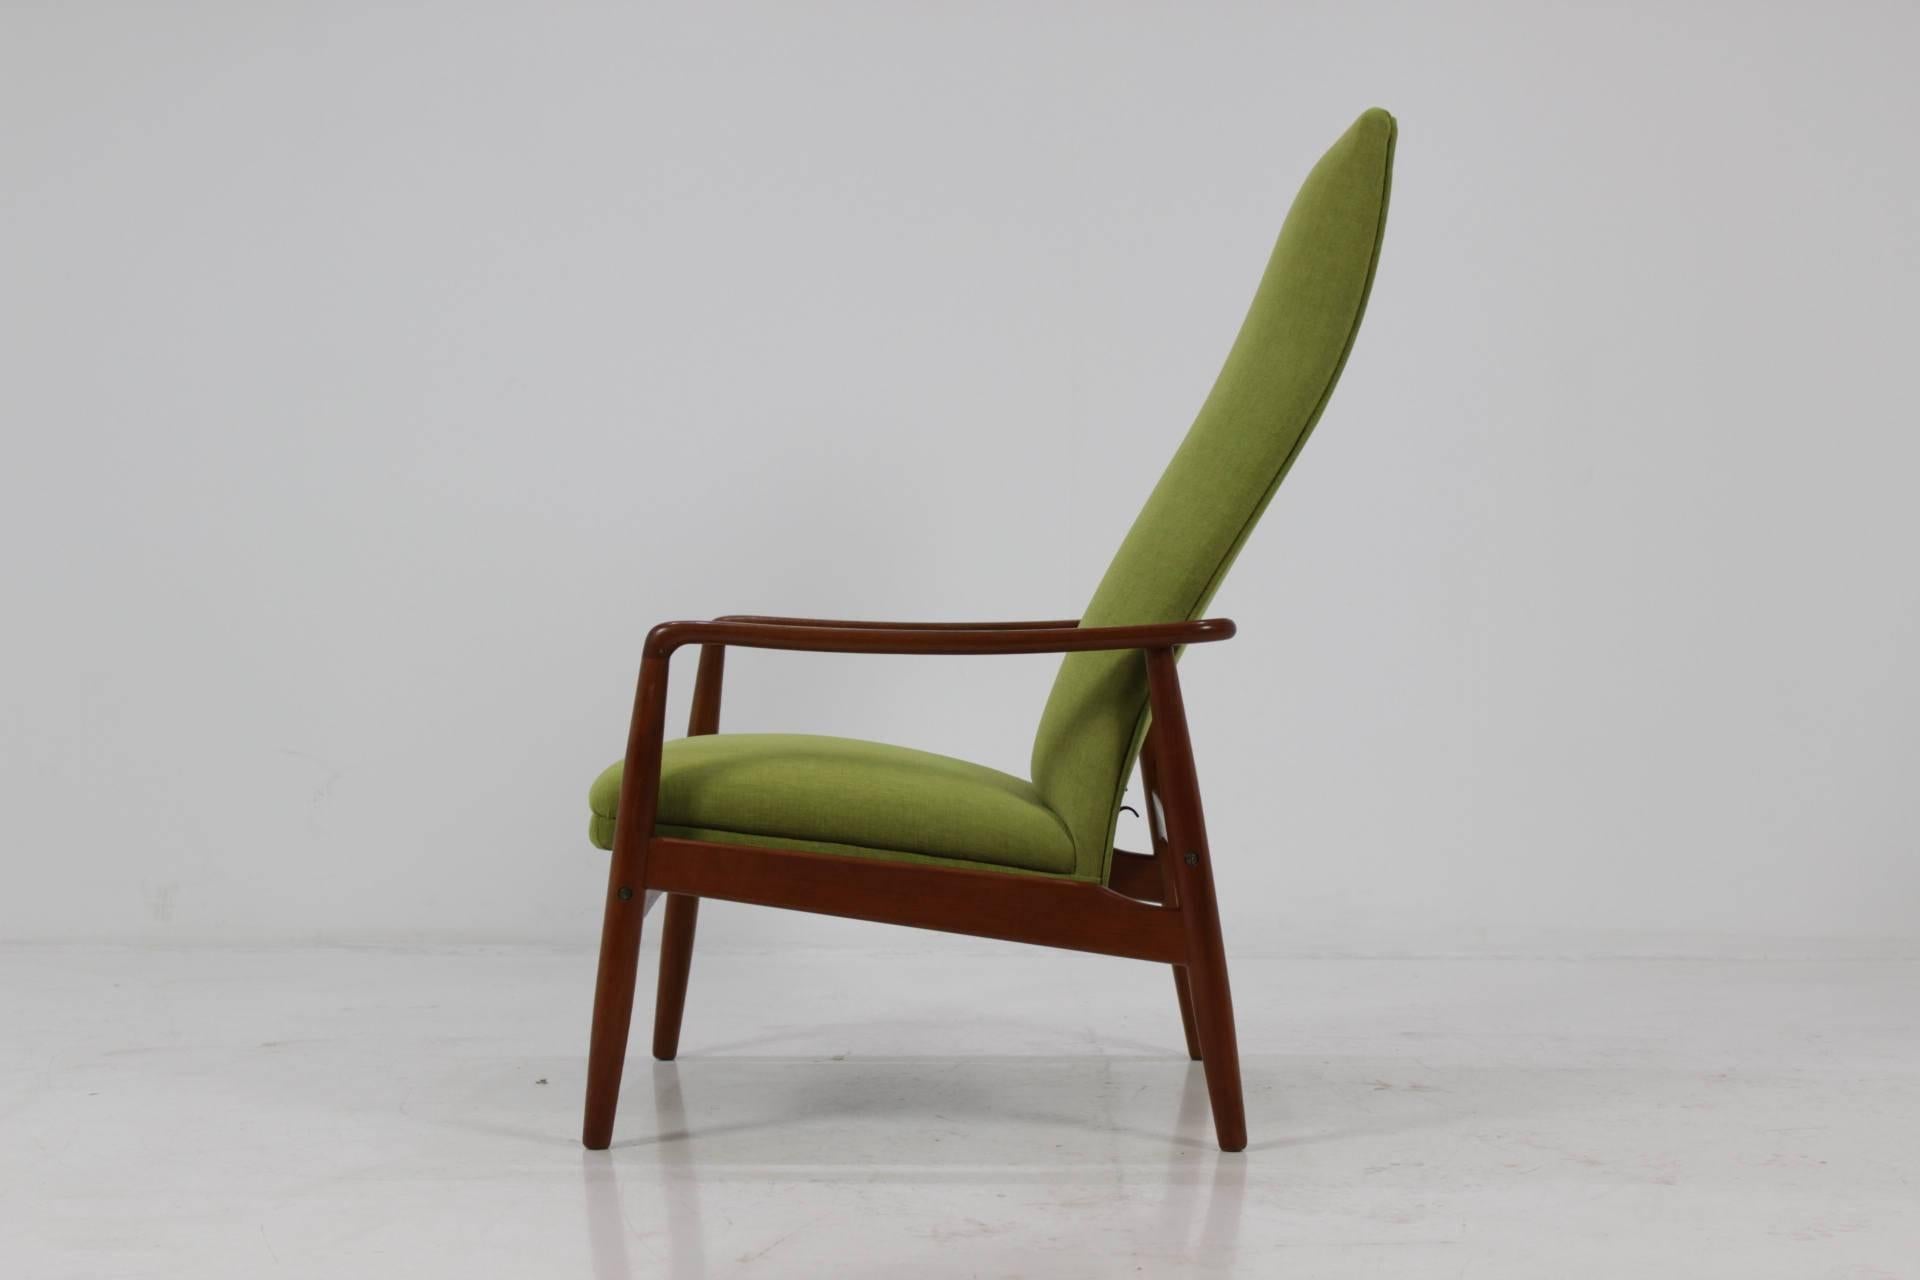 Teak framed reclining lounge chair designed by Søren Ladefoged for SL Møbler, Denmark, 1960s. The item was carefully restored and newly upholstered with fabric upholstery.